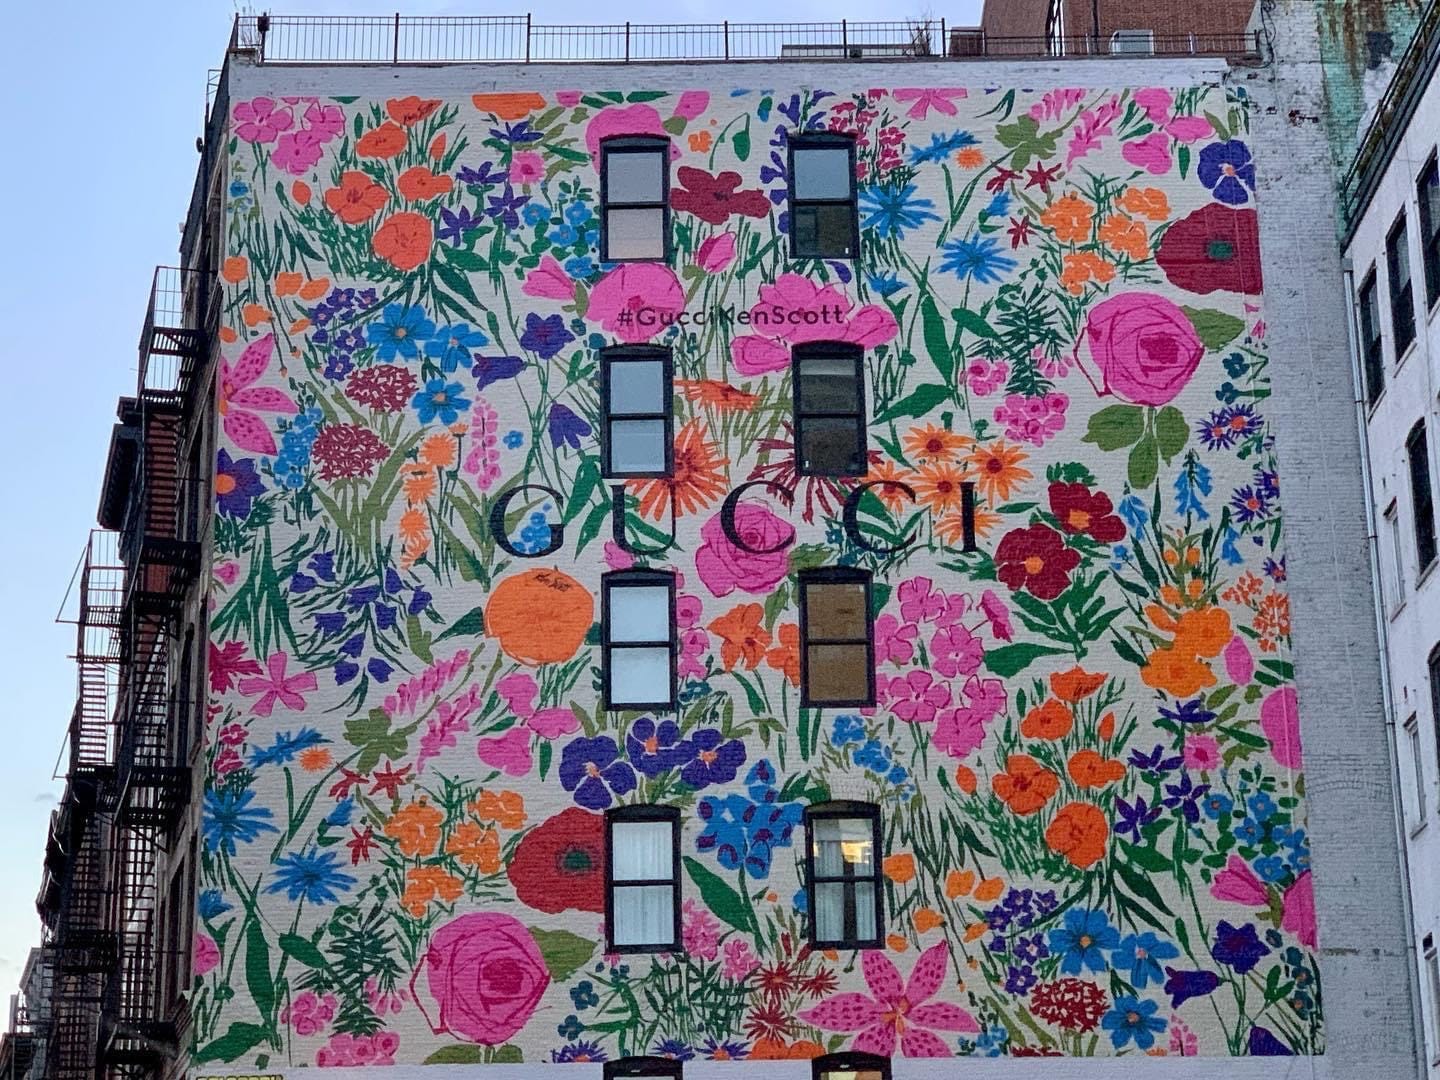 The side of a multi-story brick building with windows and a mural of all kinds of flowers with the word GUCCI centered.